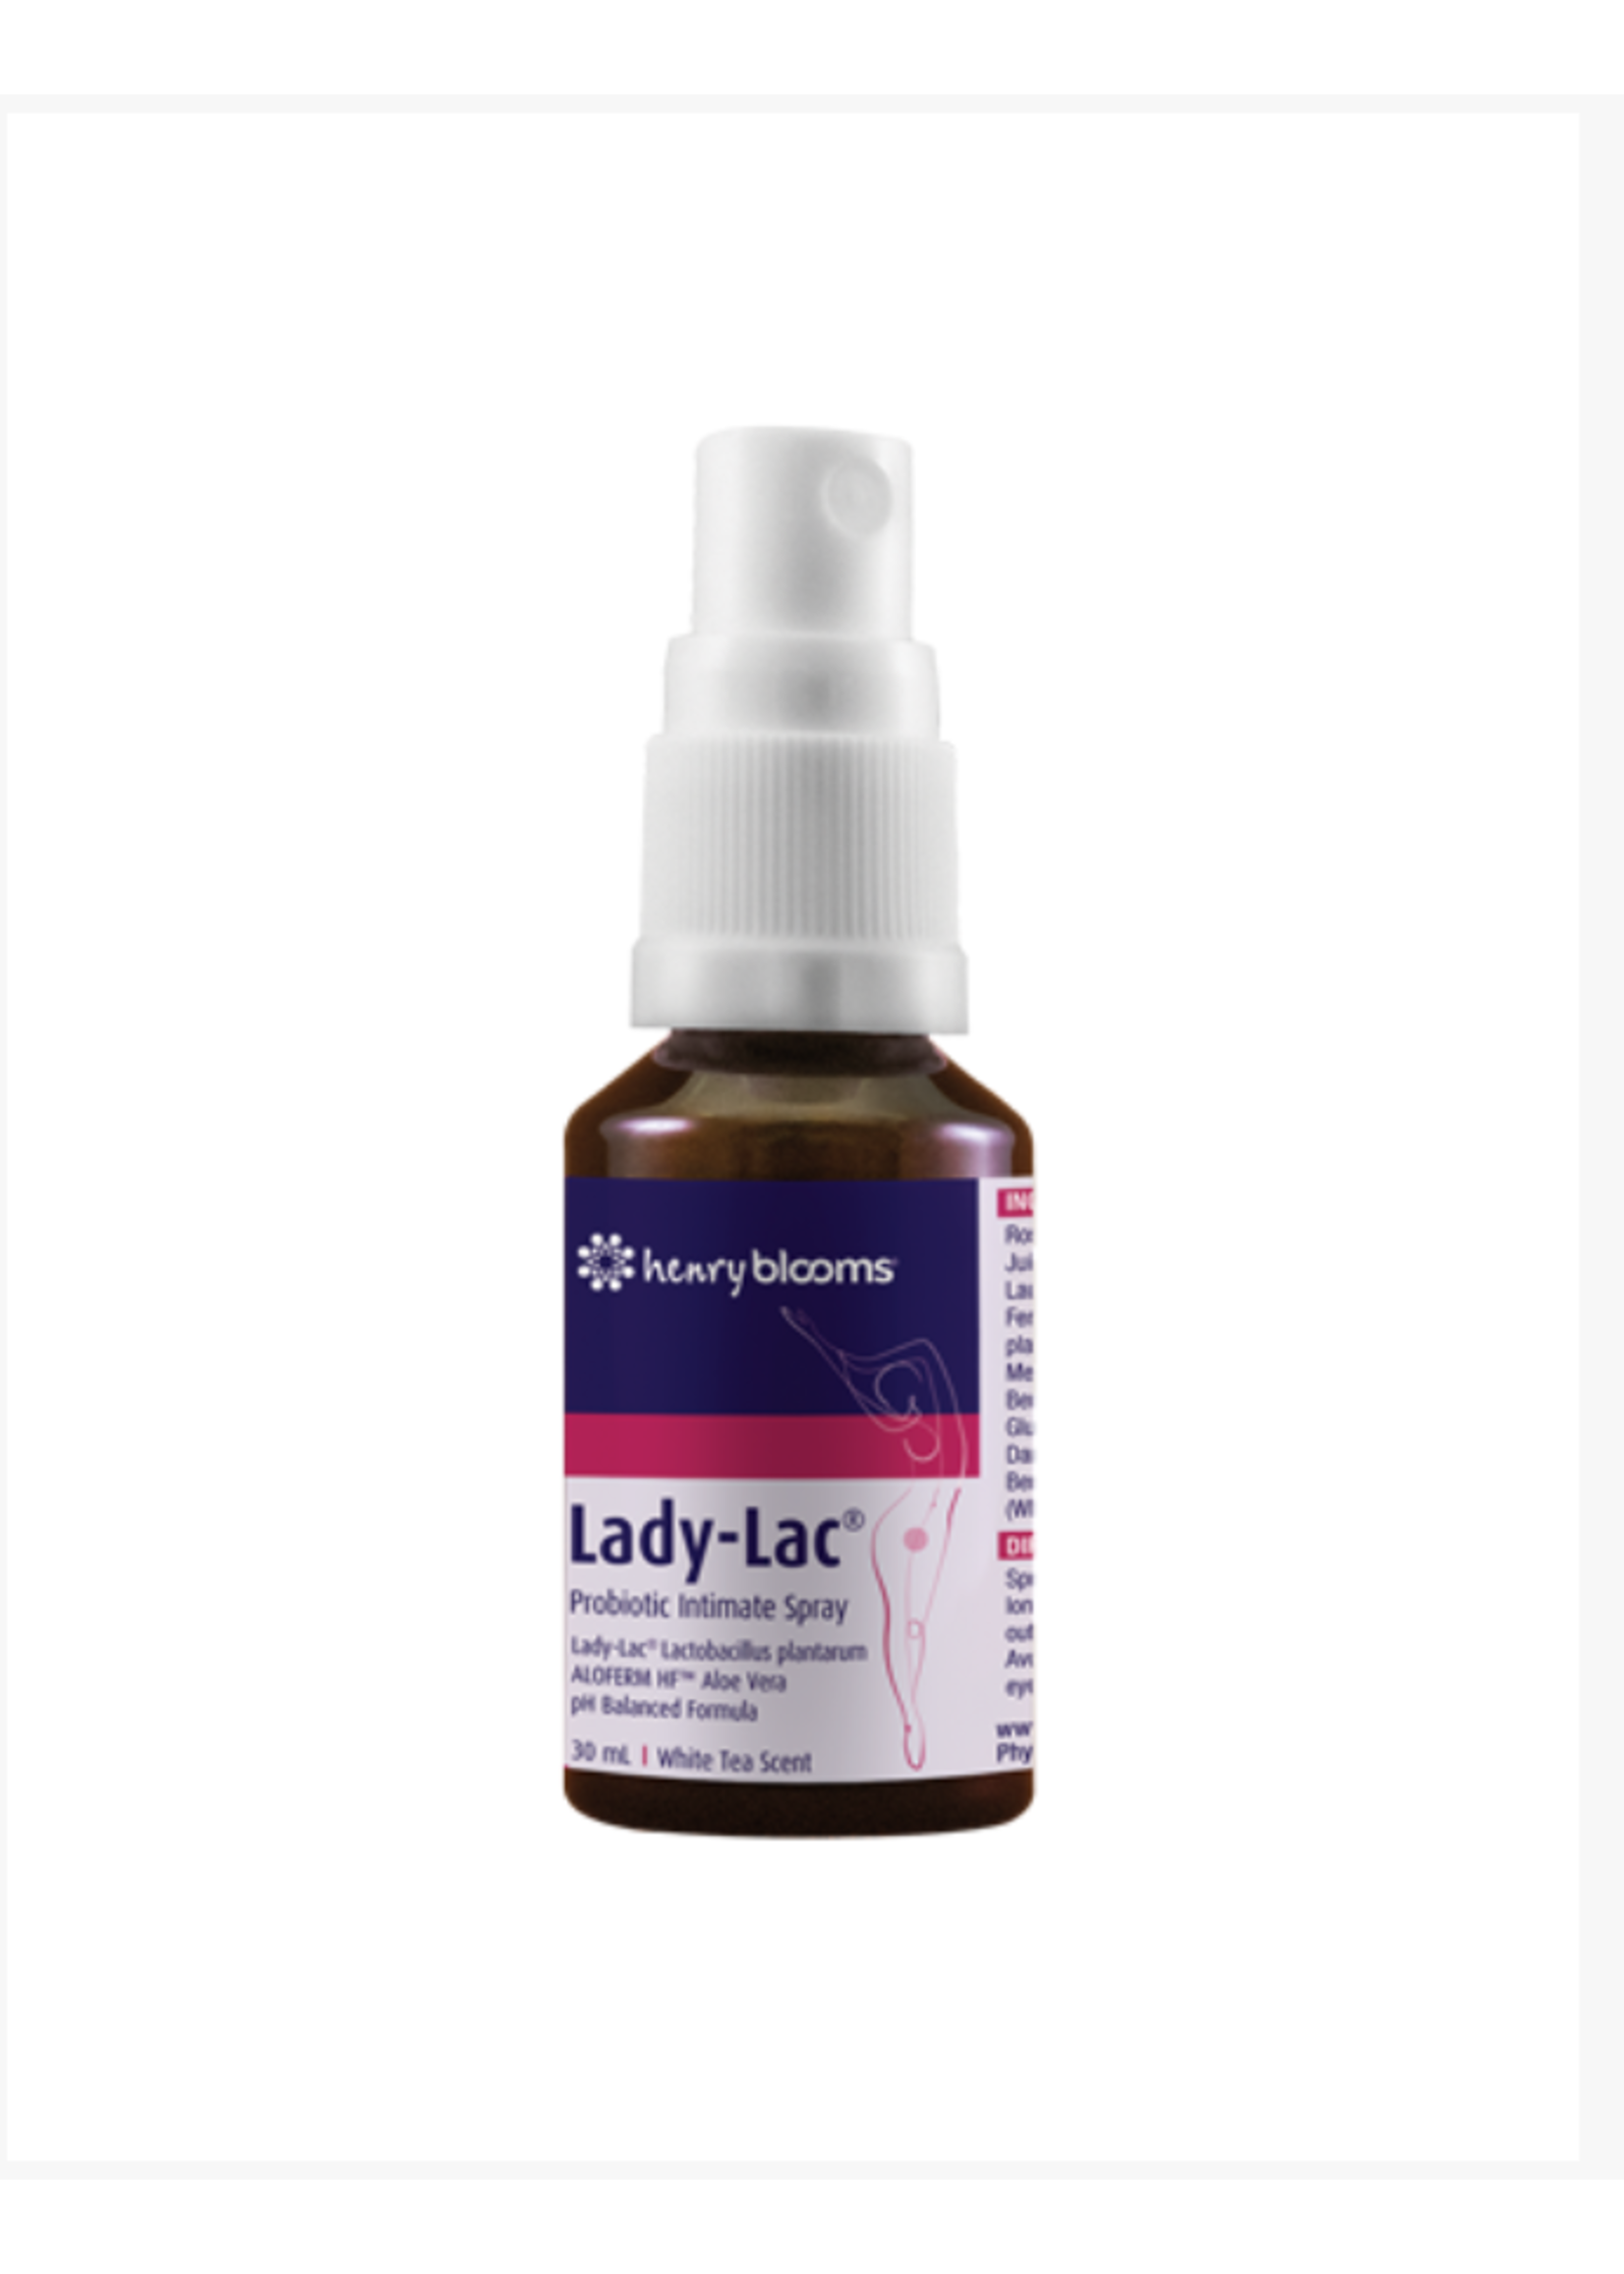 Blooms Blooms Lady-Lac Intimacy spray 30ml (DNR)